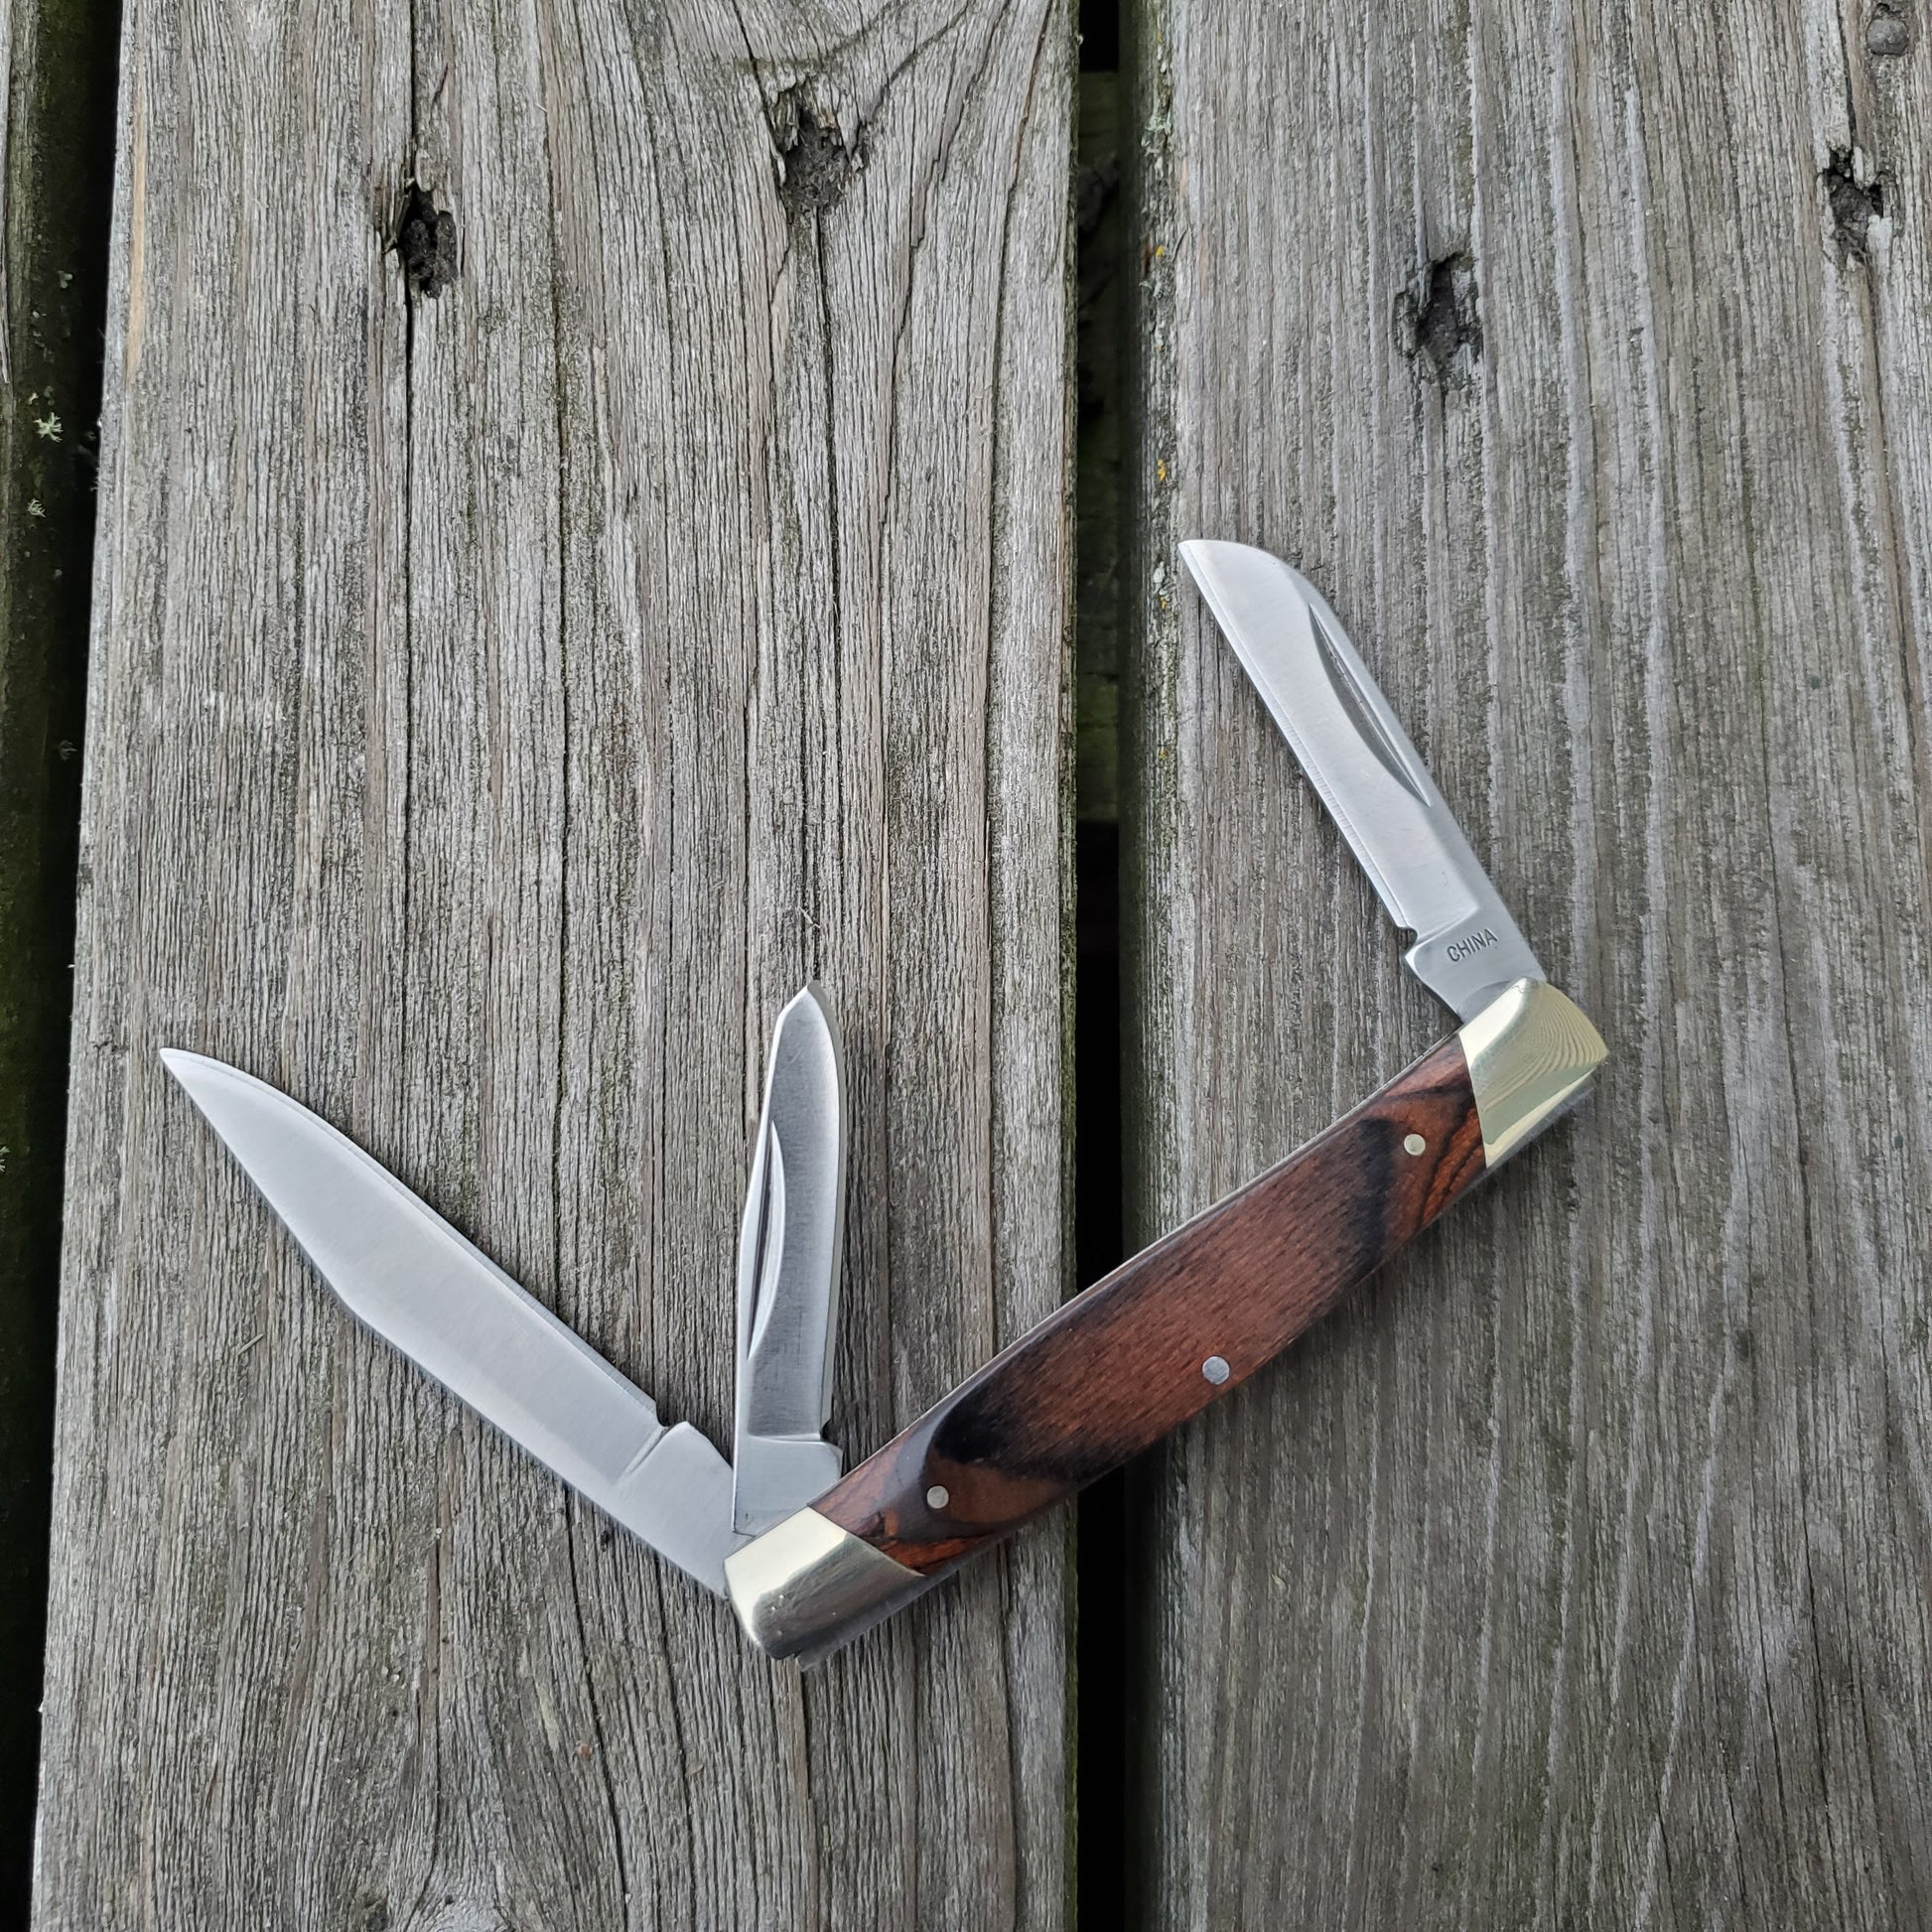 What's Your Newest Buck Knife Page 133, 42% OFF